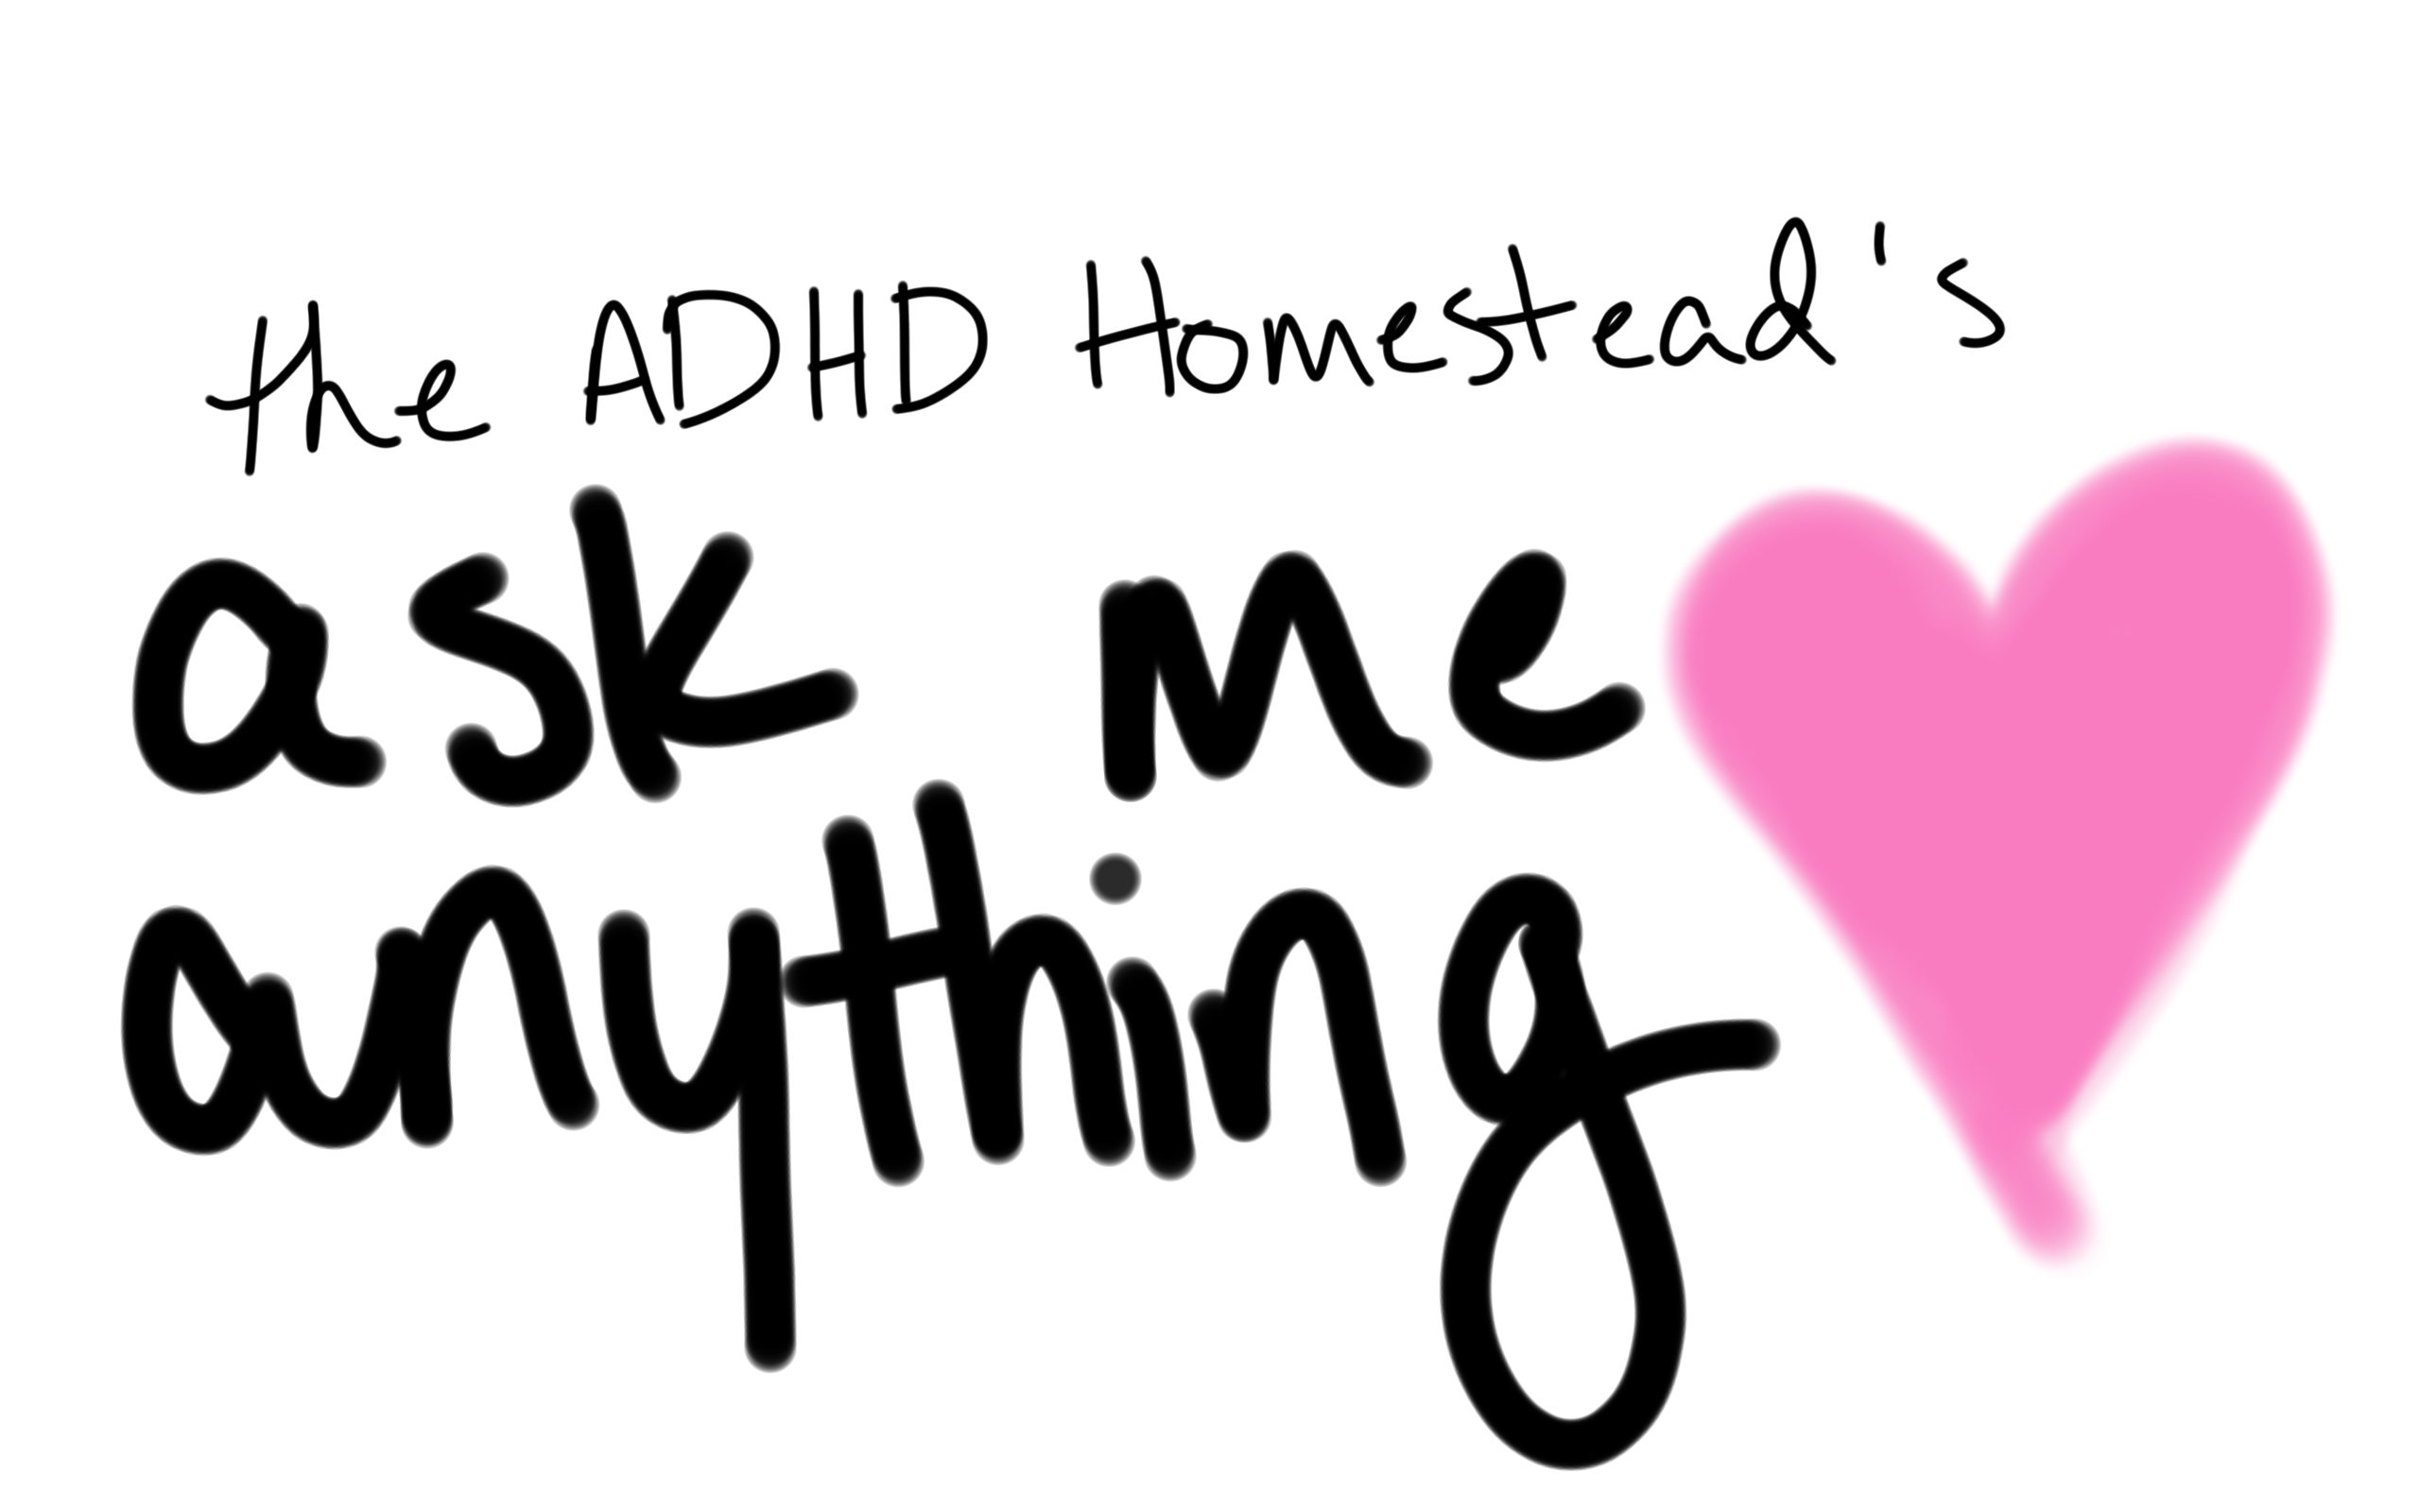 Ask me anything! Join me for a live Q&A on Kickstarter